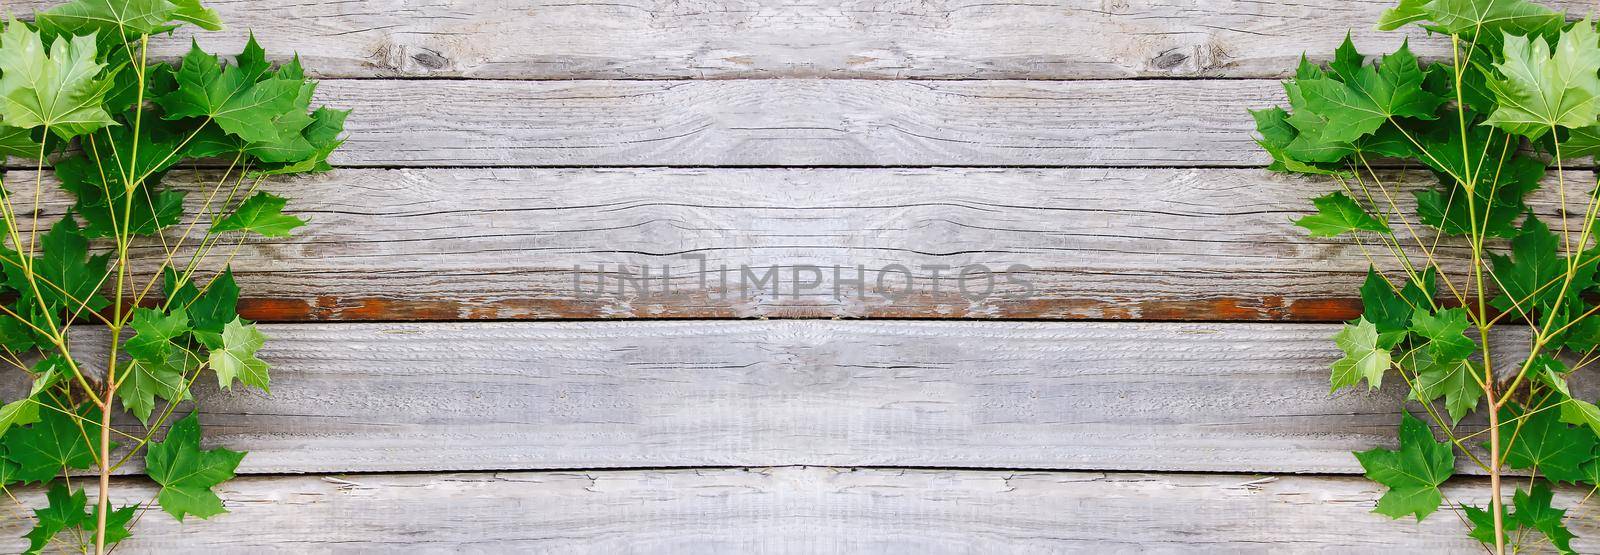 Old grunge wood texture with green leaves. Rough natural texture. by nightlyviolet